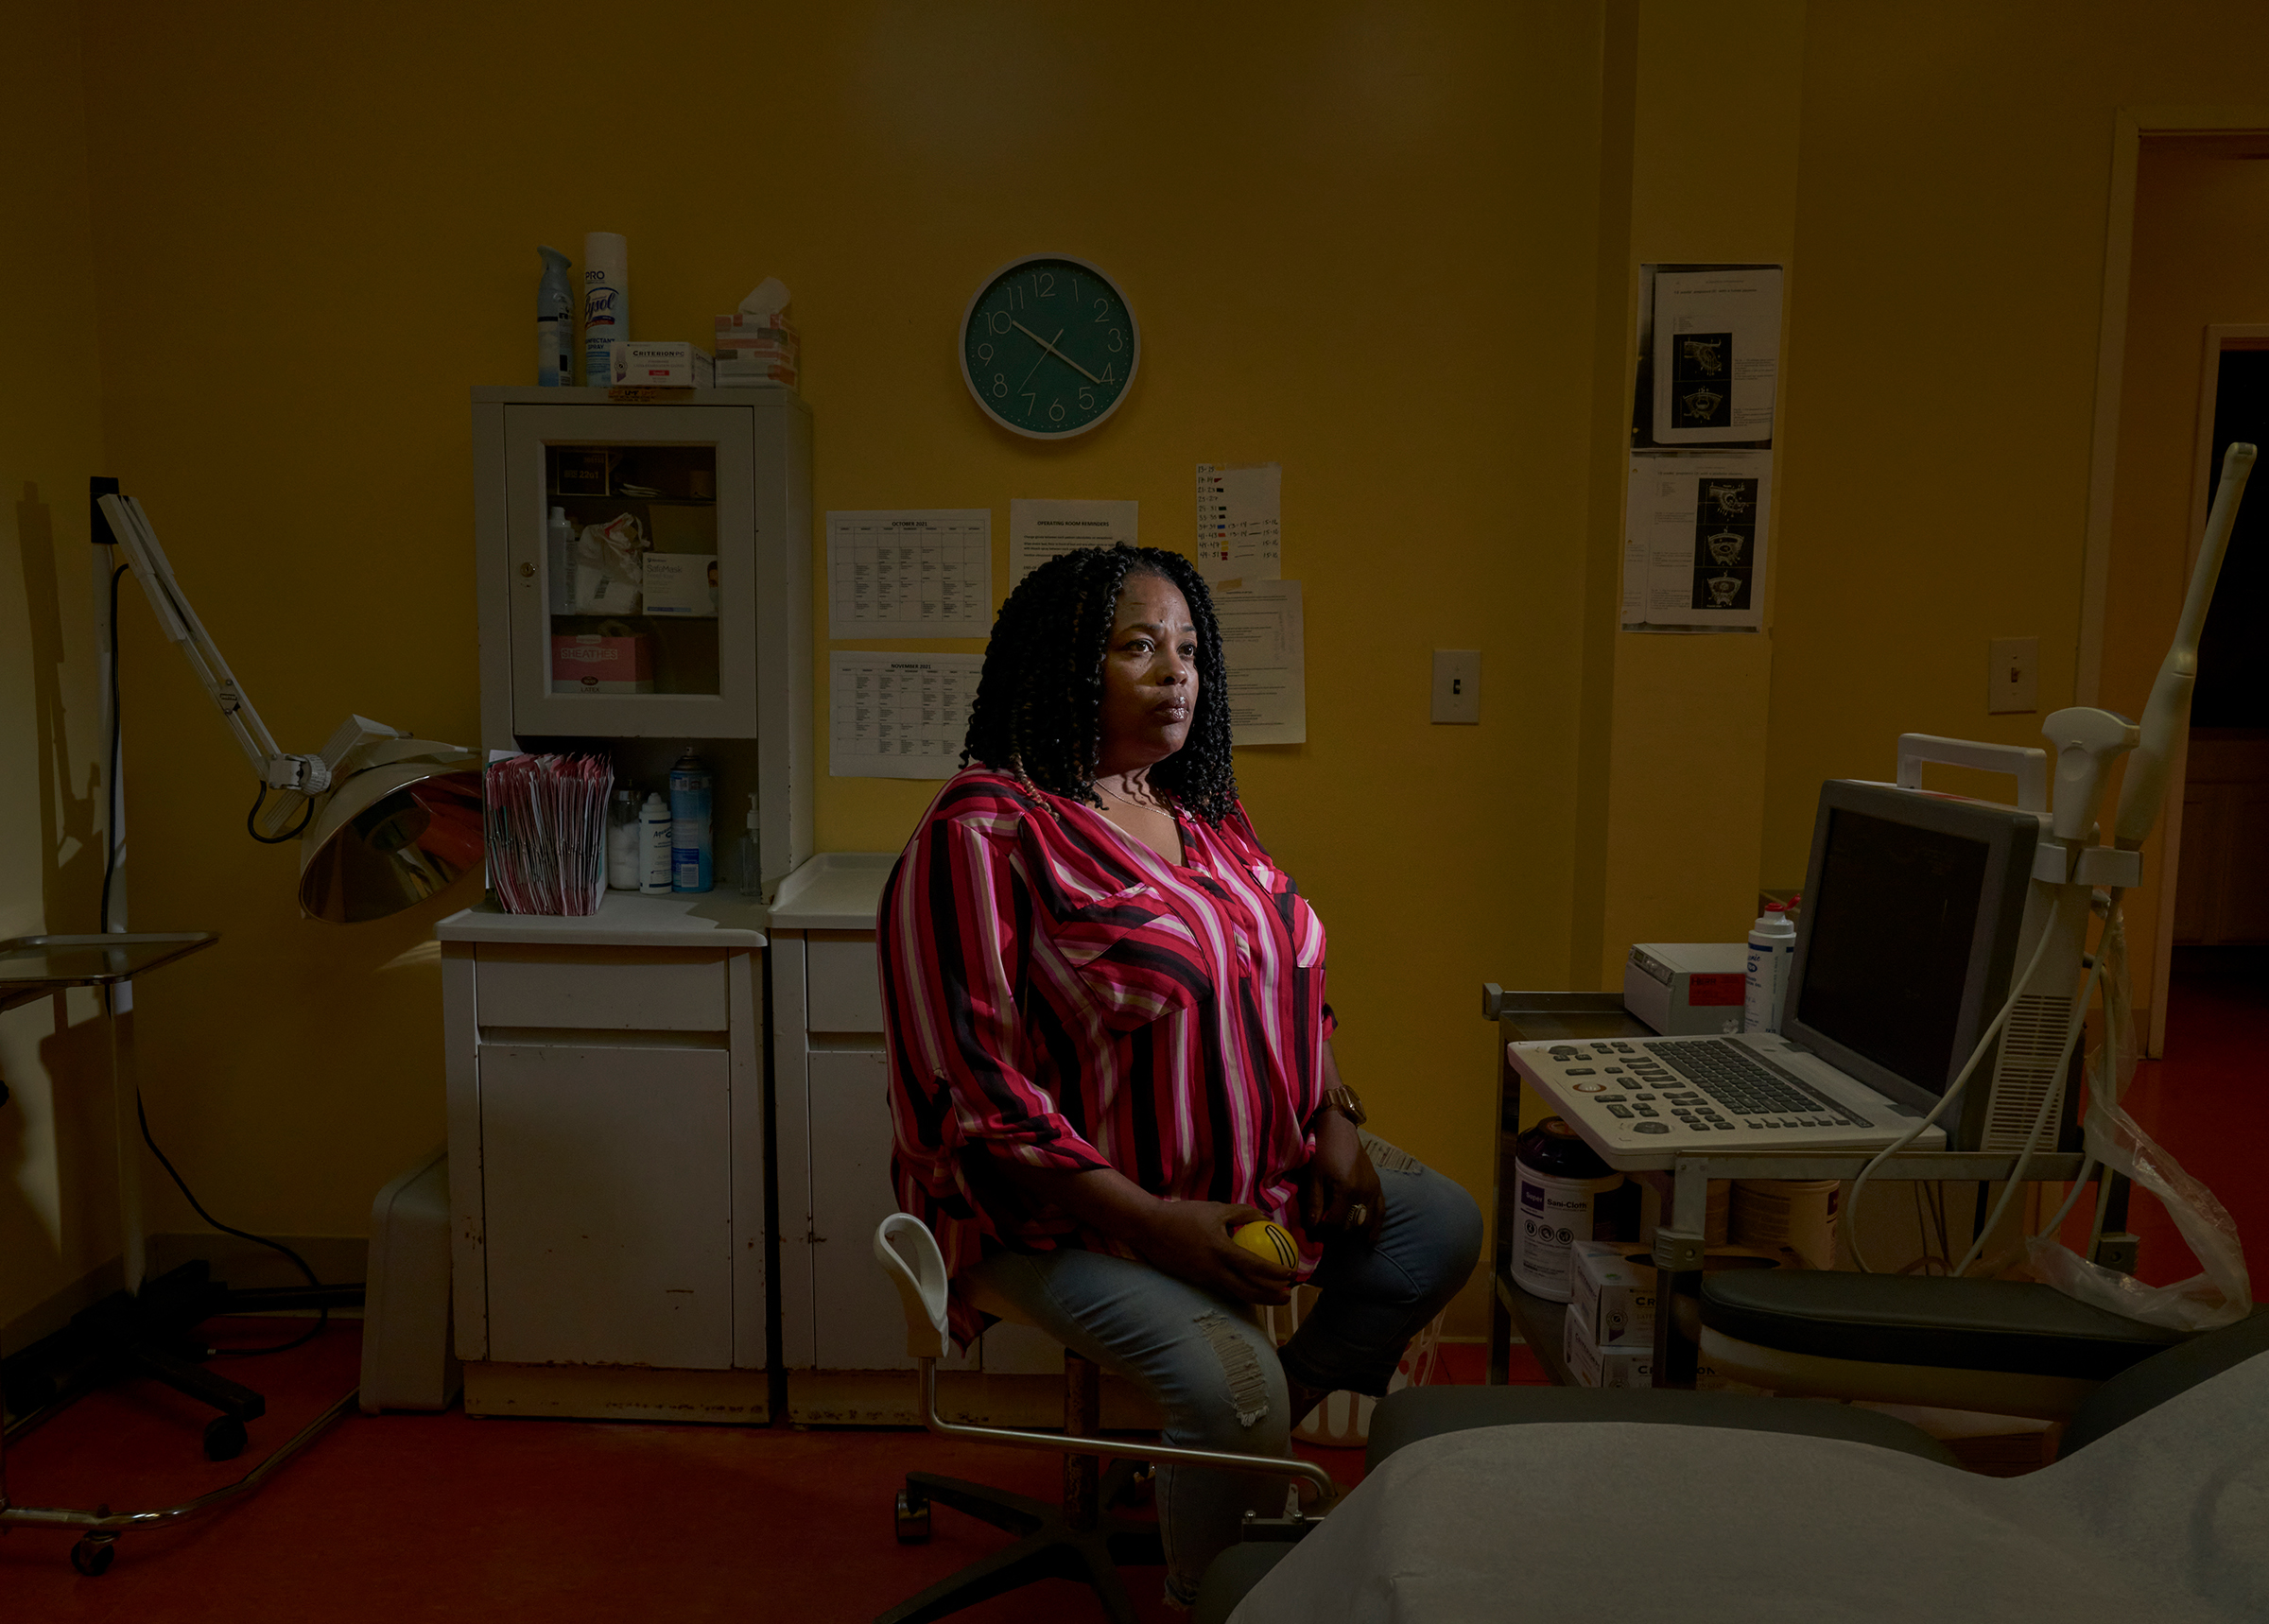 <strong>Shannon Brewer</strong>. "<a href="https://time.com/6116072/mississippi-abortion-supreme-court-jackson-womens-health/">Inside Mississippi’s Last Abortion Clinic</a>," Nov. 22 issue. (Stacy Kranitz for TIME)